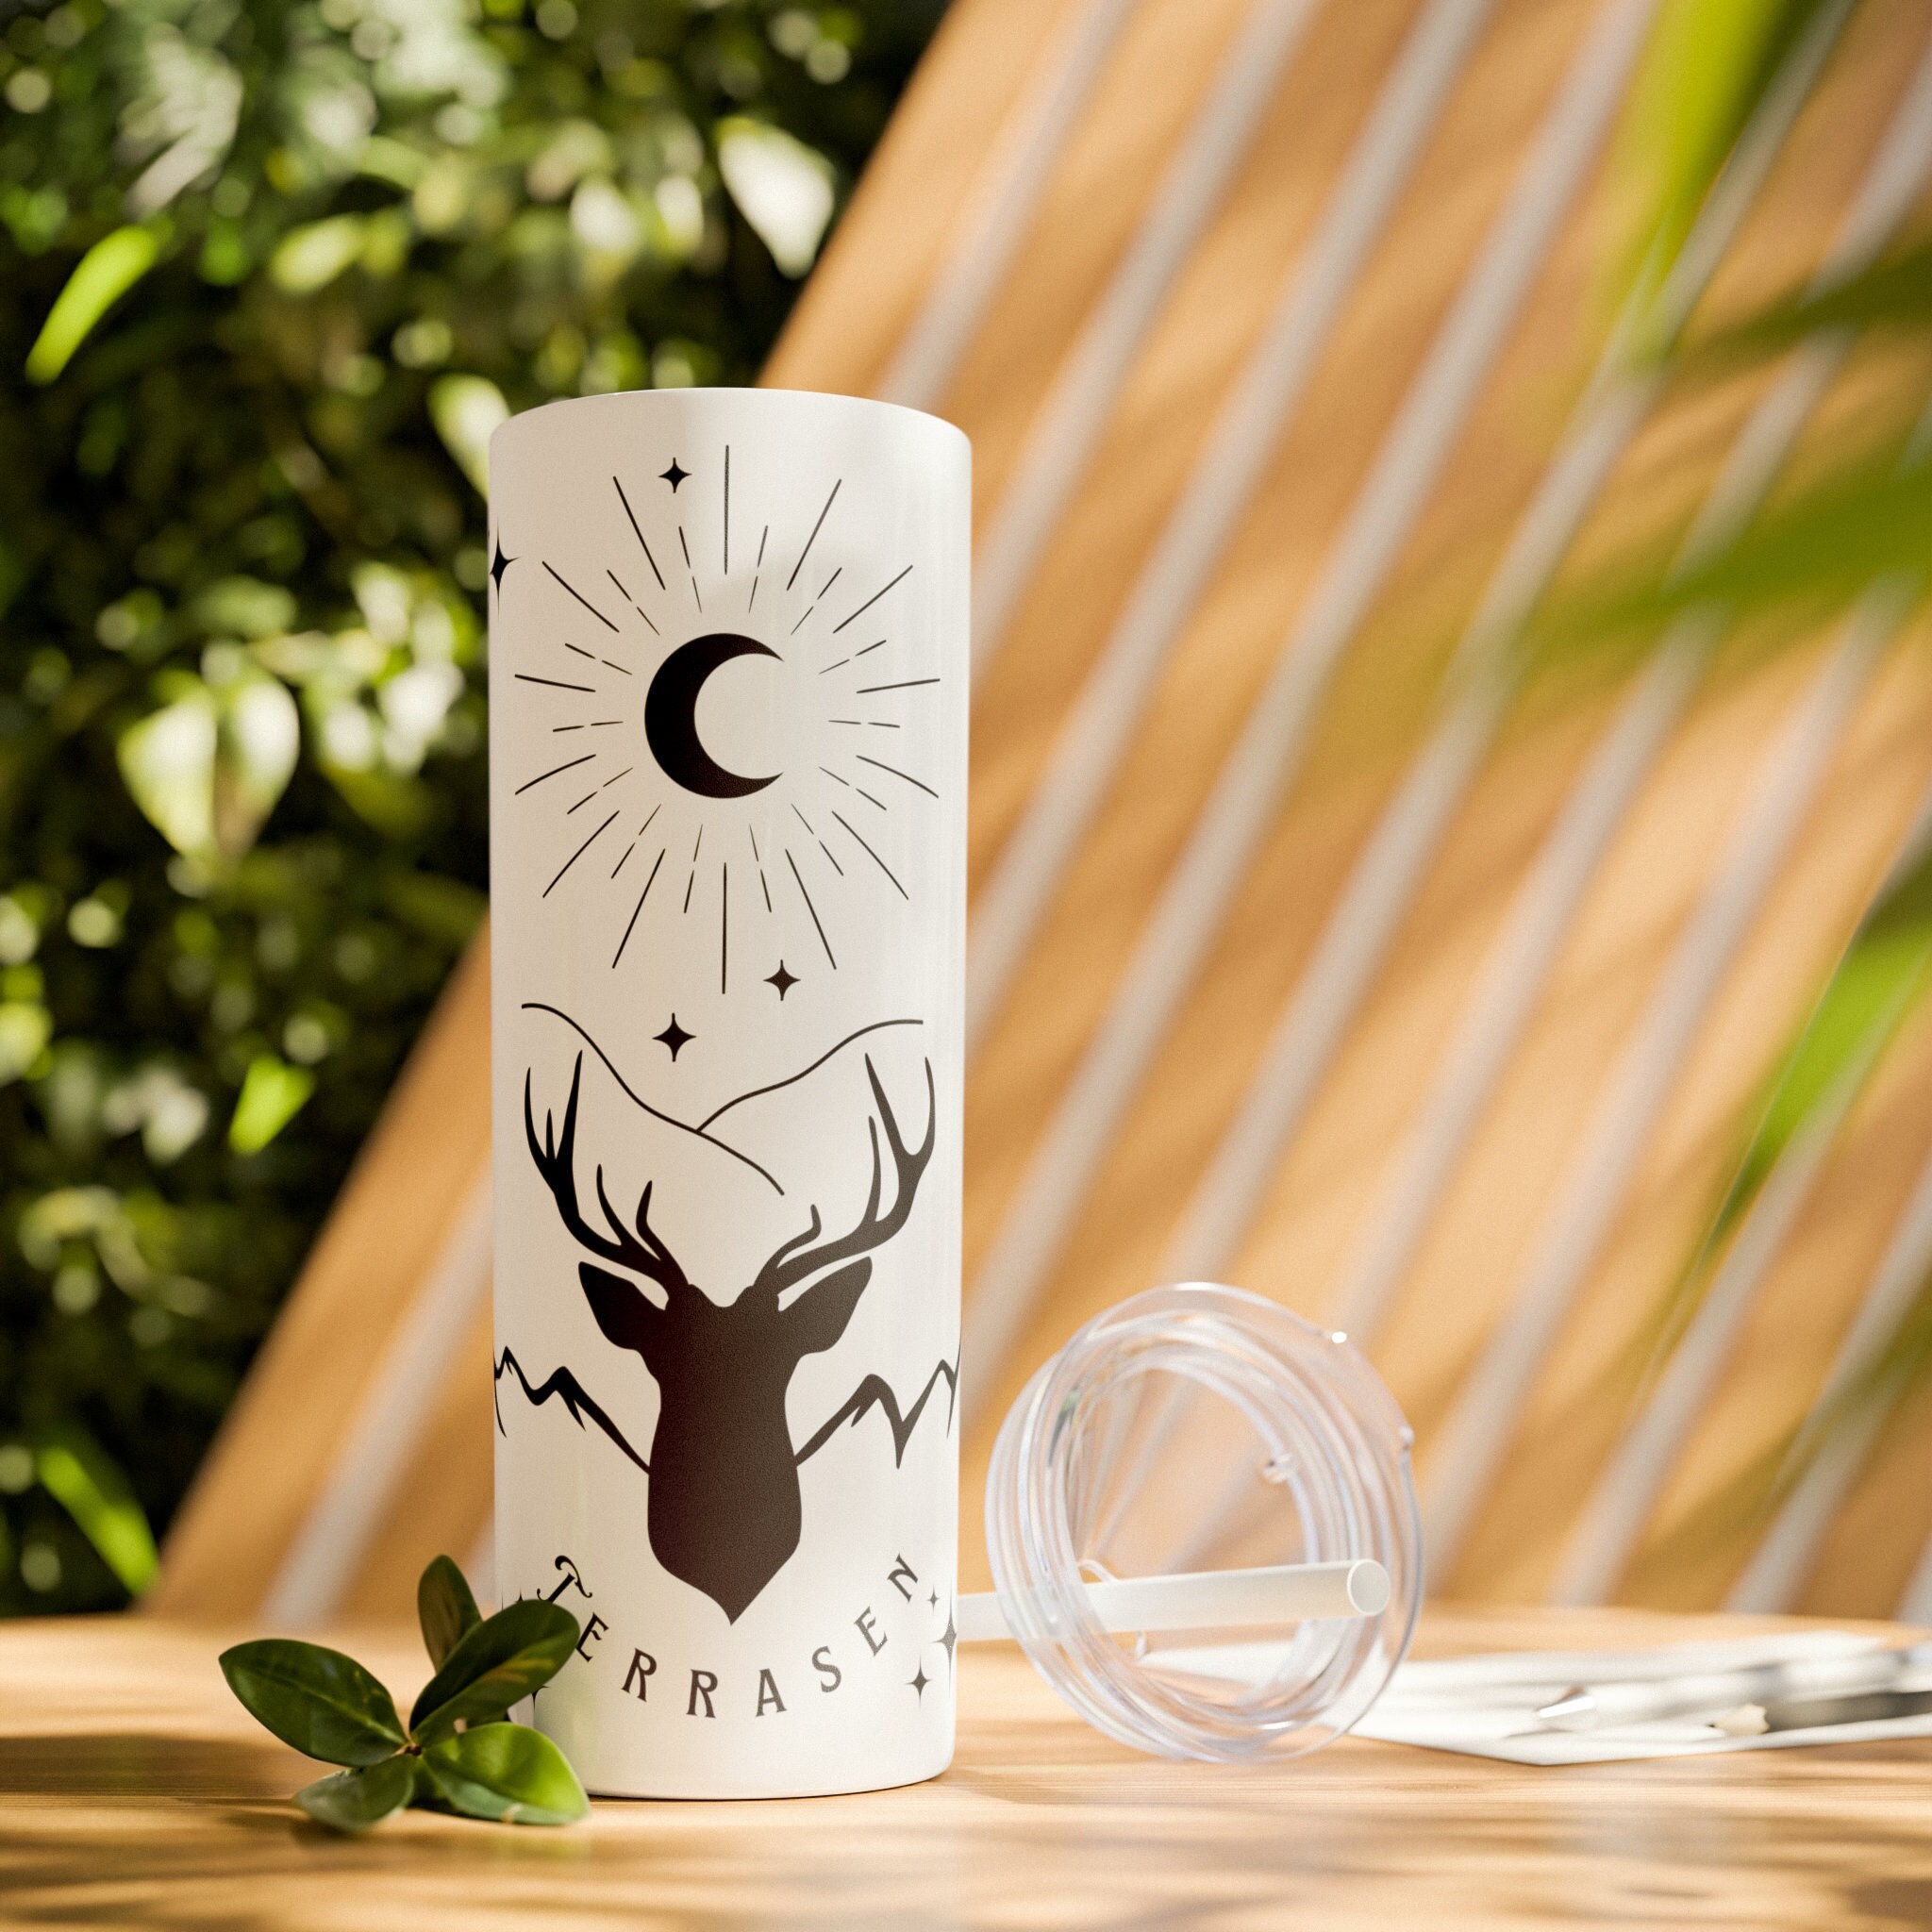 Throne of Glass Inspired: Glass Water Bottle